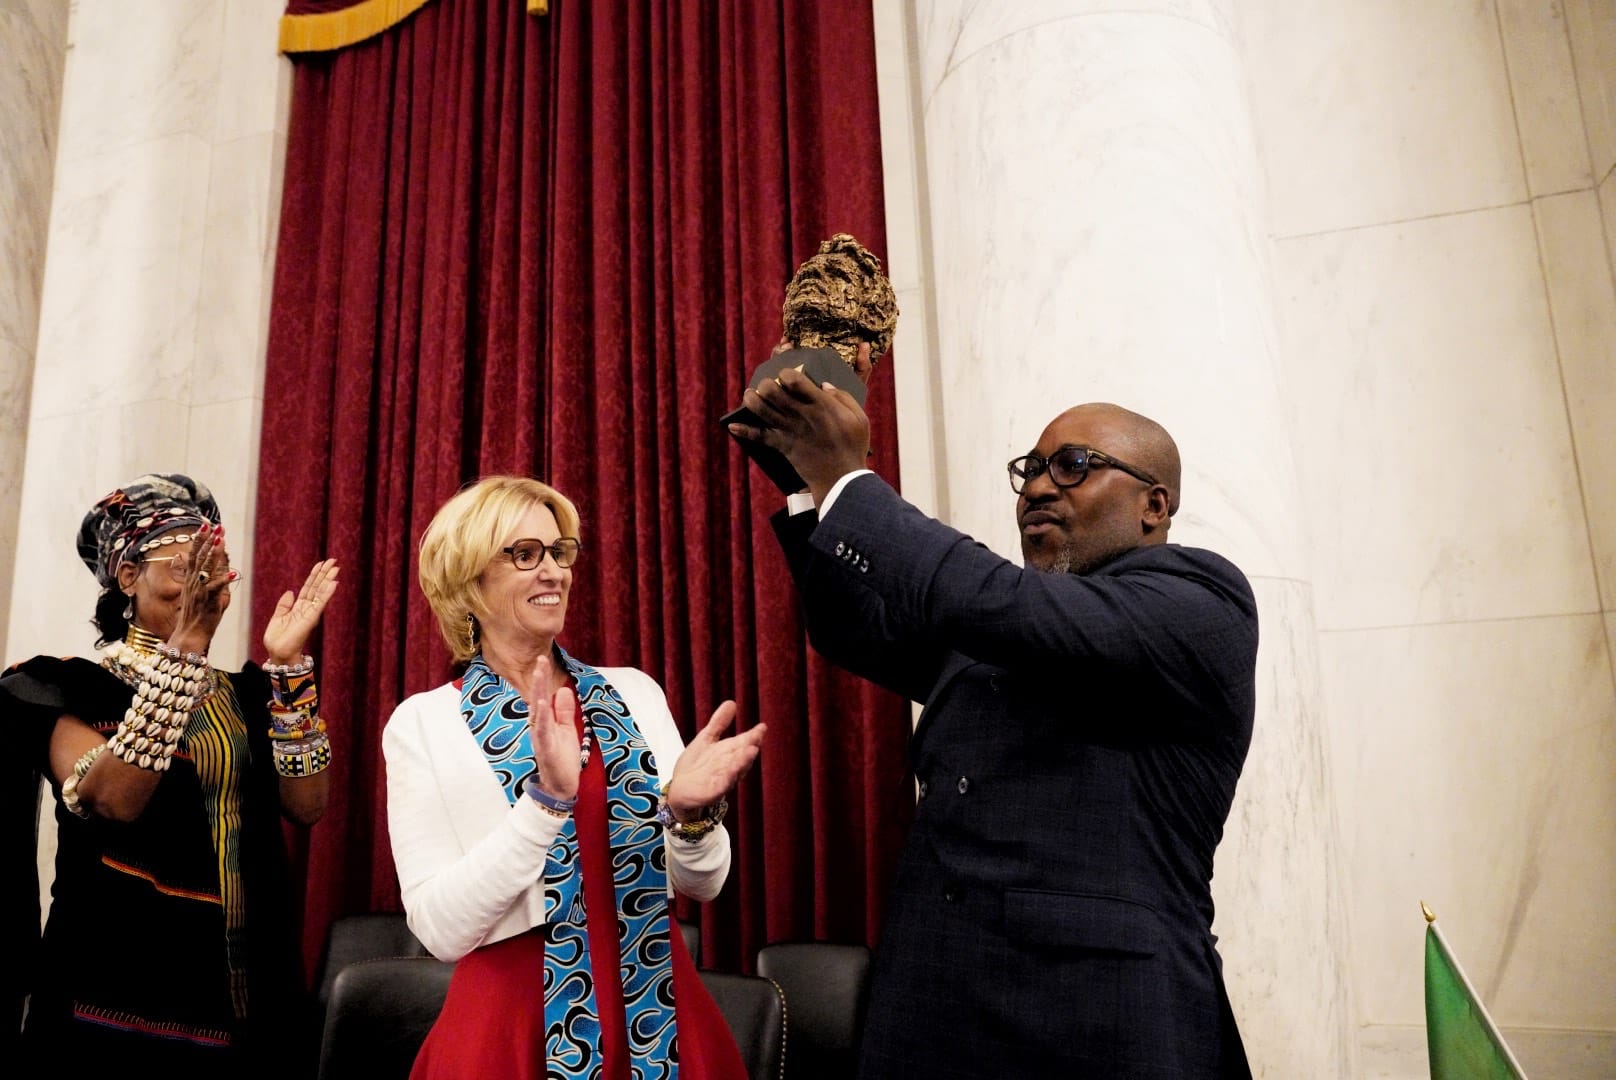 (from left to right) co-laureate Maximilienne C. Ngo Mbe, president of RFK Human Rights Kerry Kennedy, and Felix Agbor Nkongho (Balla).